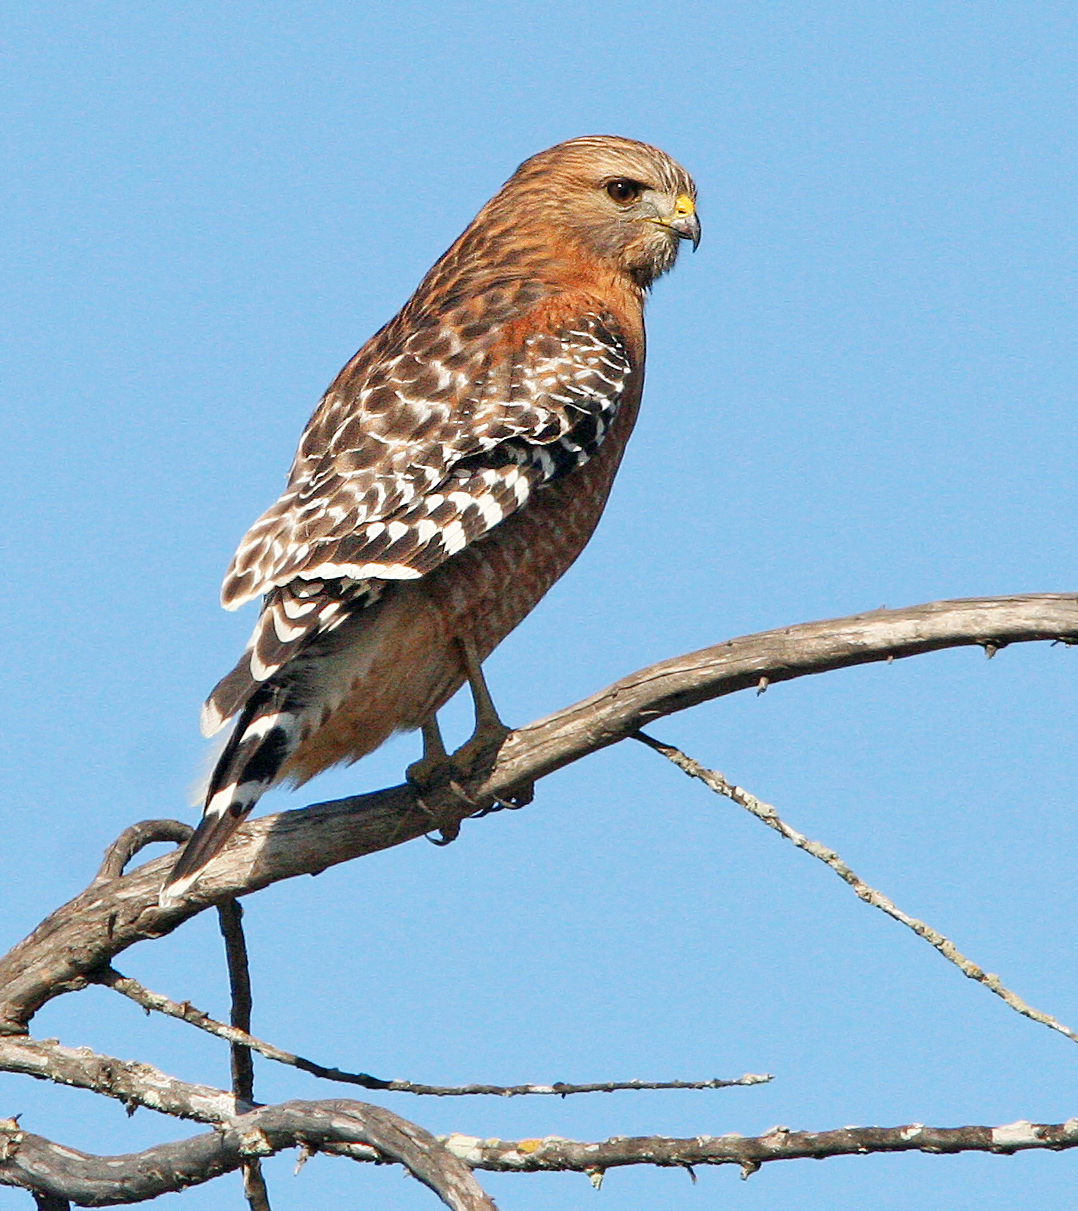 A Red-Shouldered Hawk perched on a branch